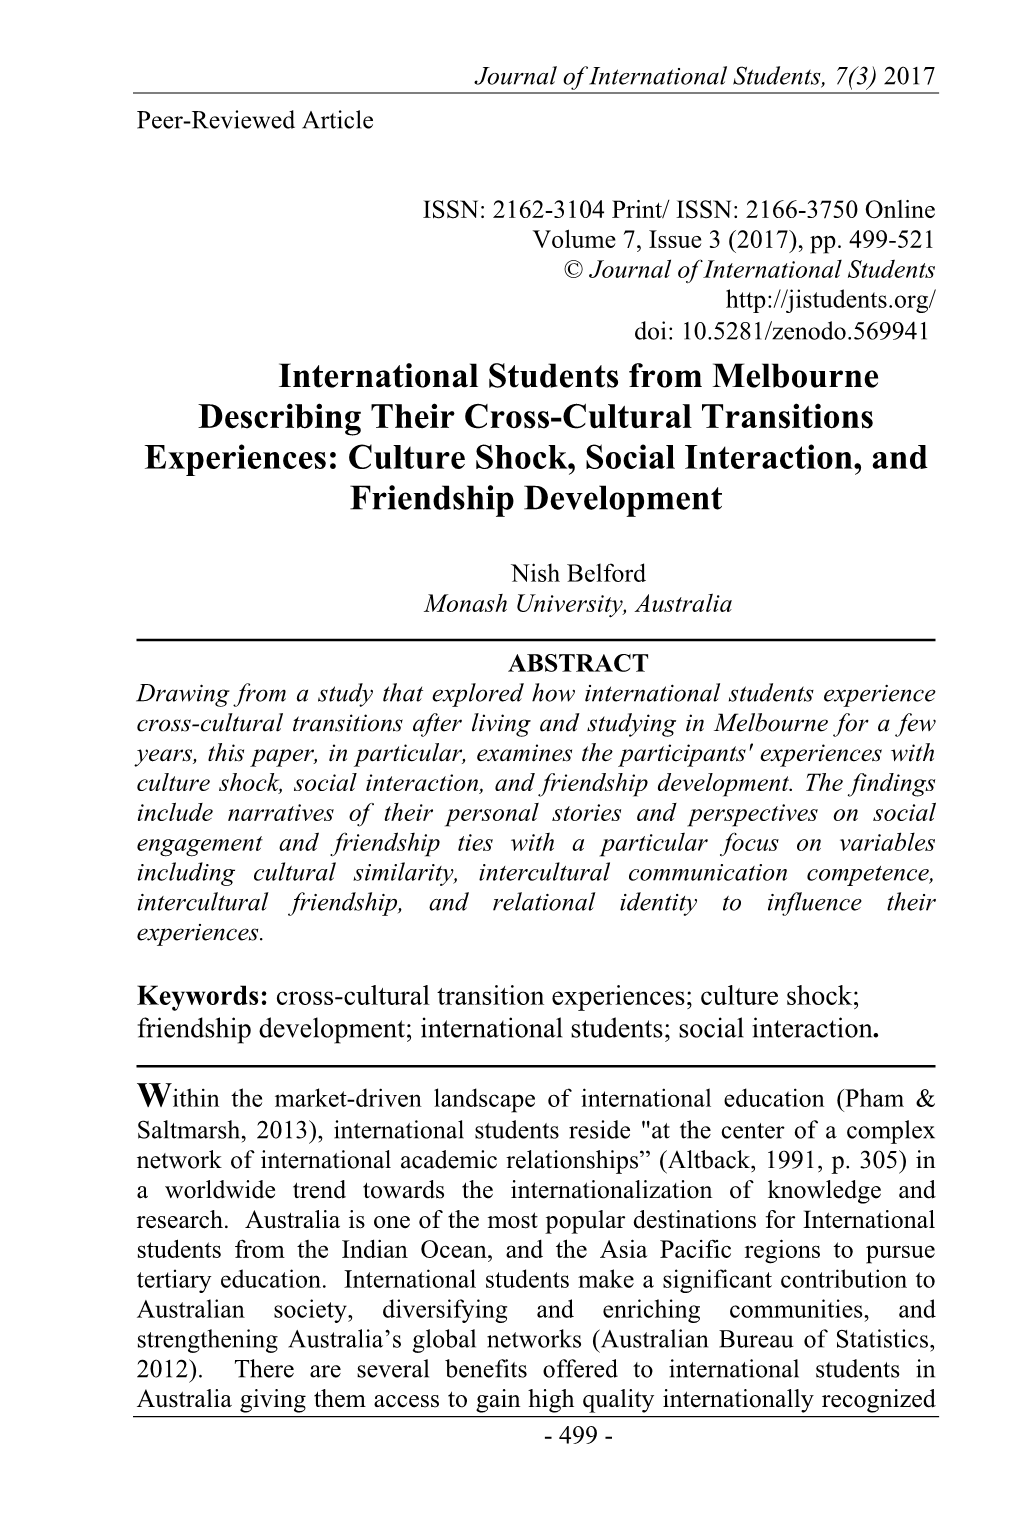 International Students from Melbourne Describing Their Cross-Cultural Transitions Experiences: Culture Shock, Social Interaction, and Friendship Development